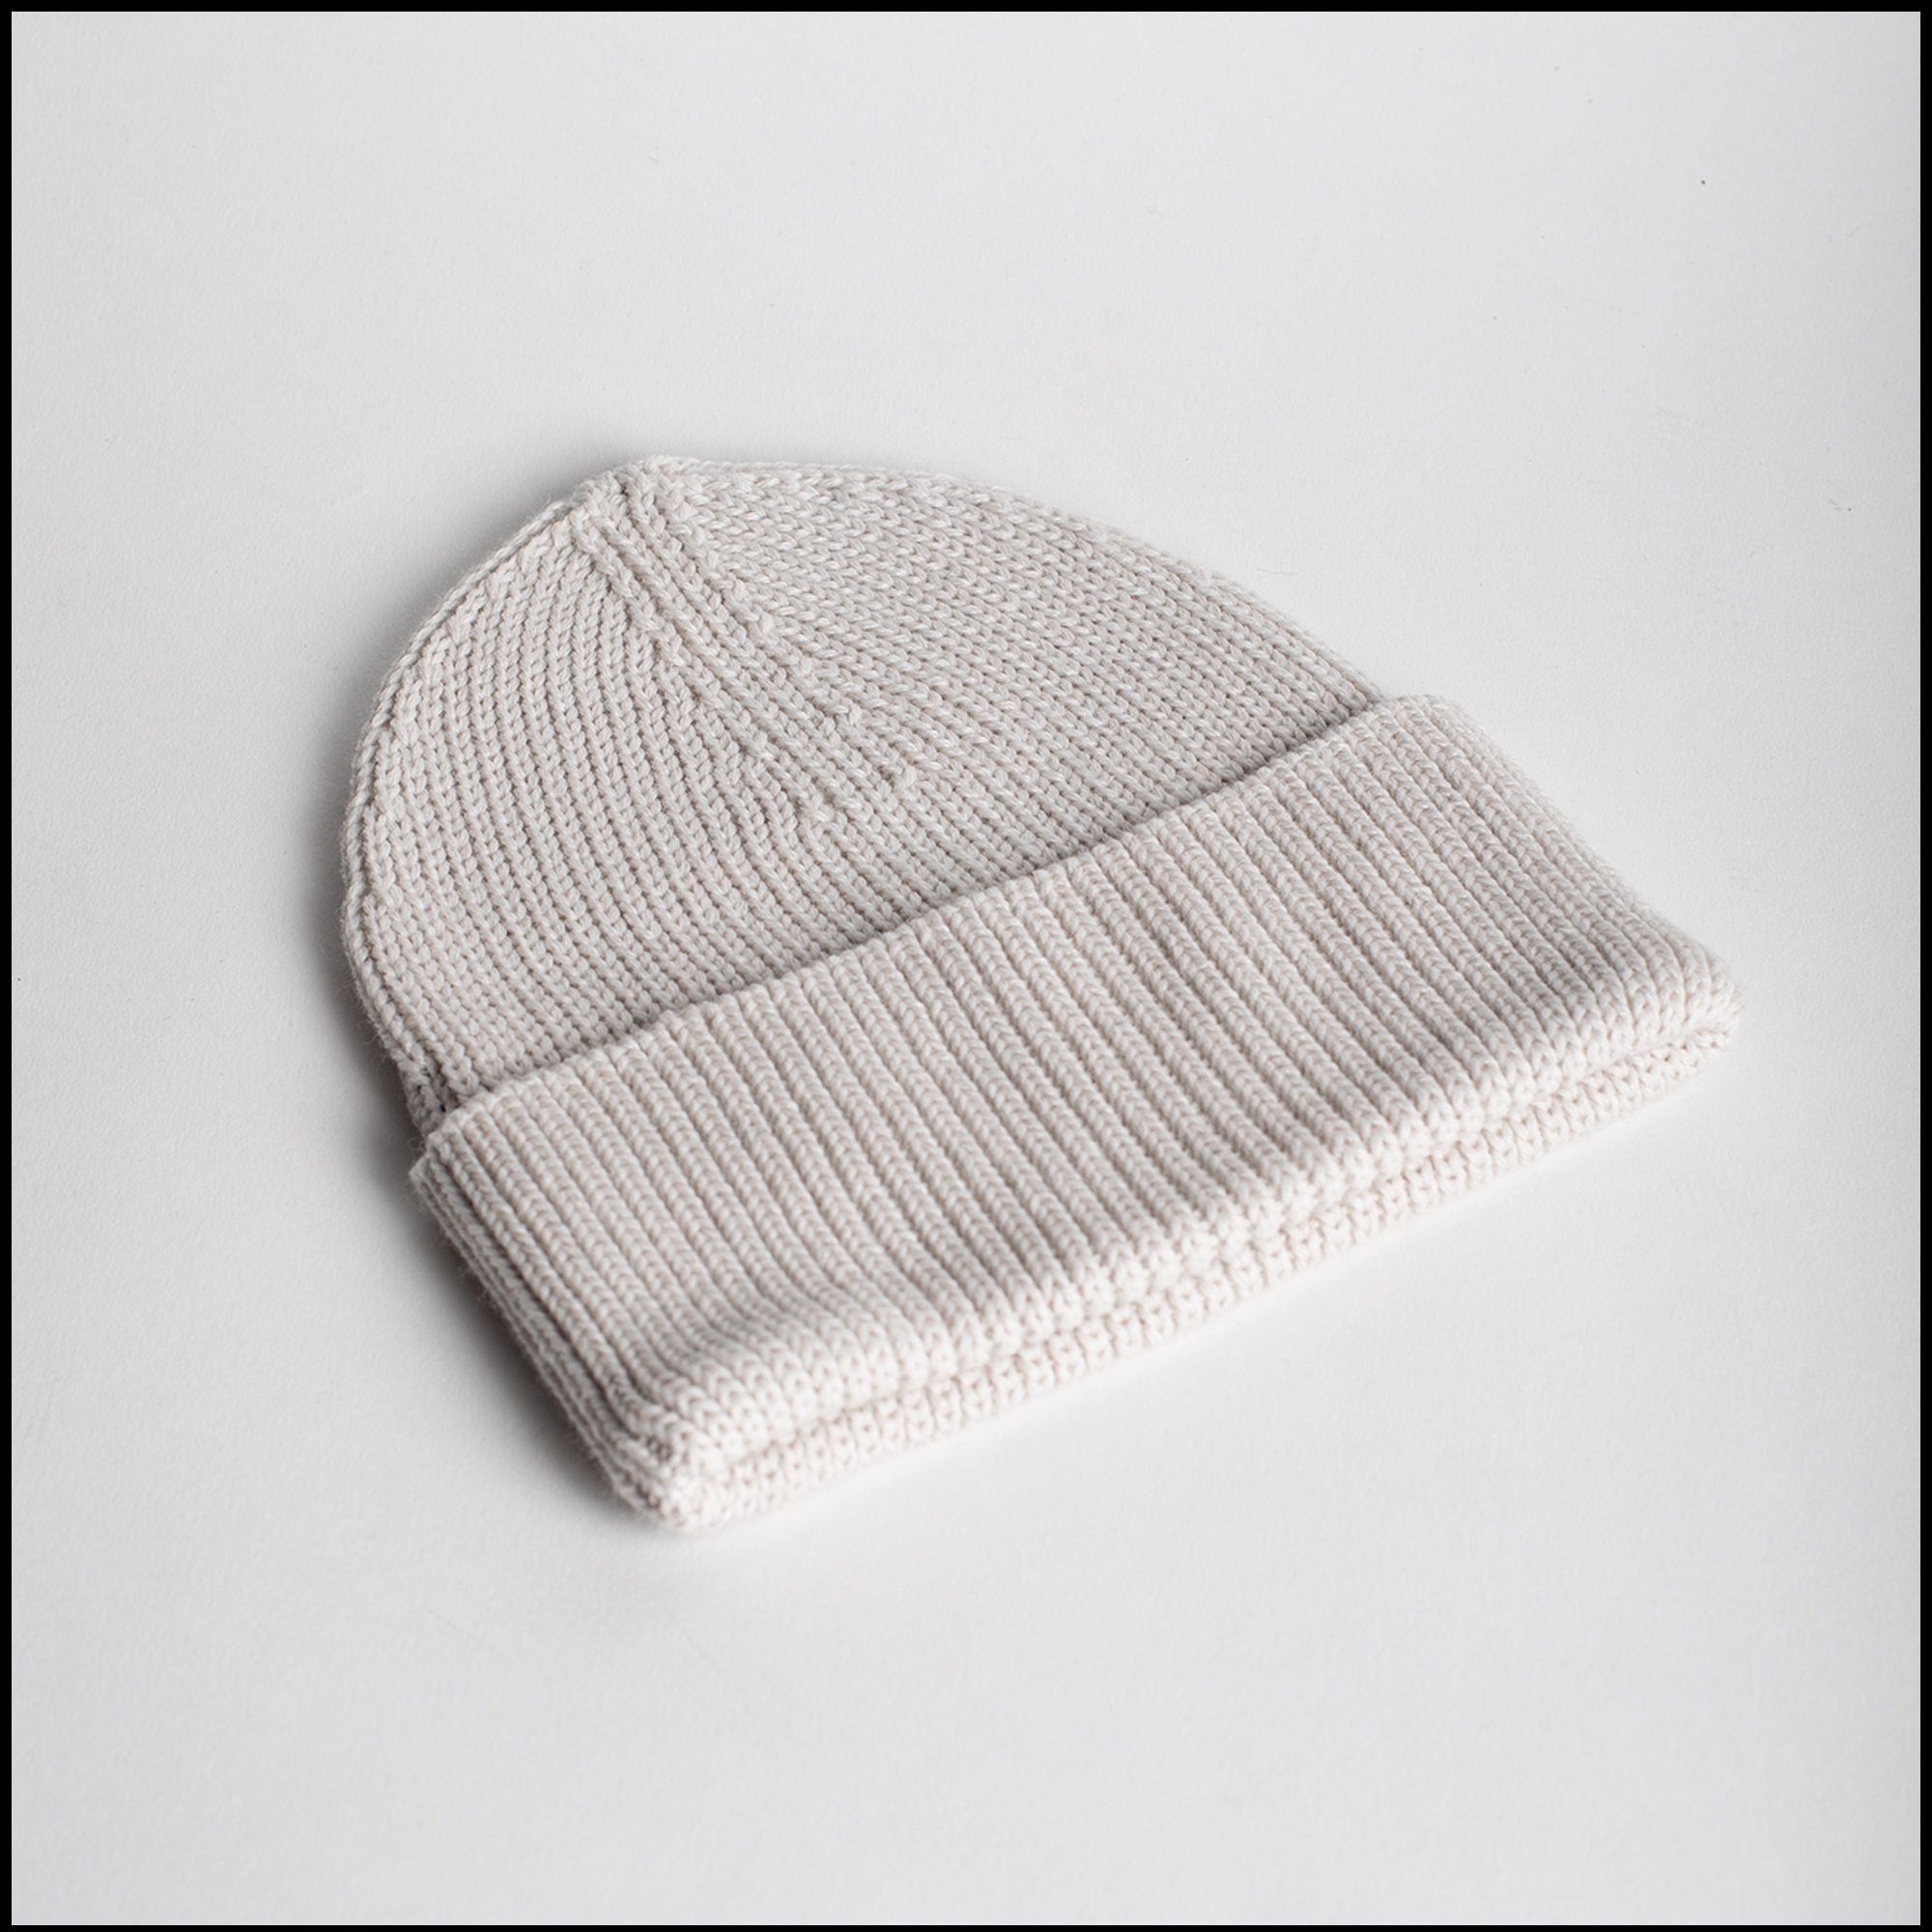 VICKO beanie in Cream color by Arpenteur